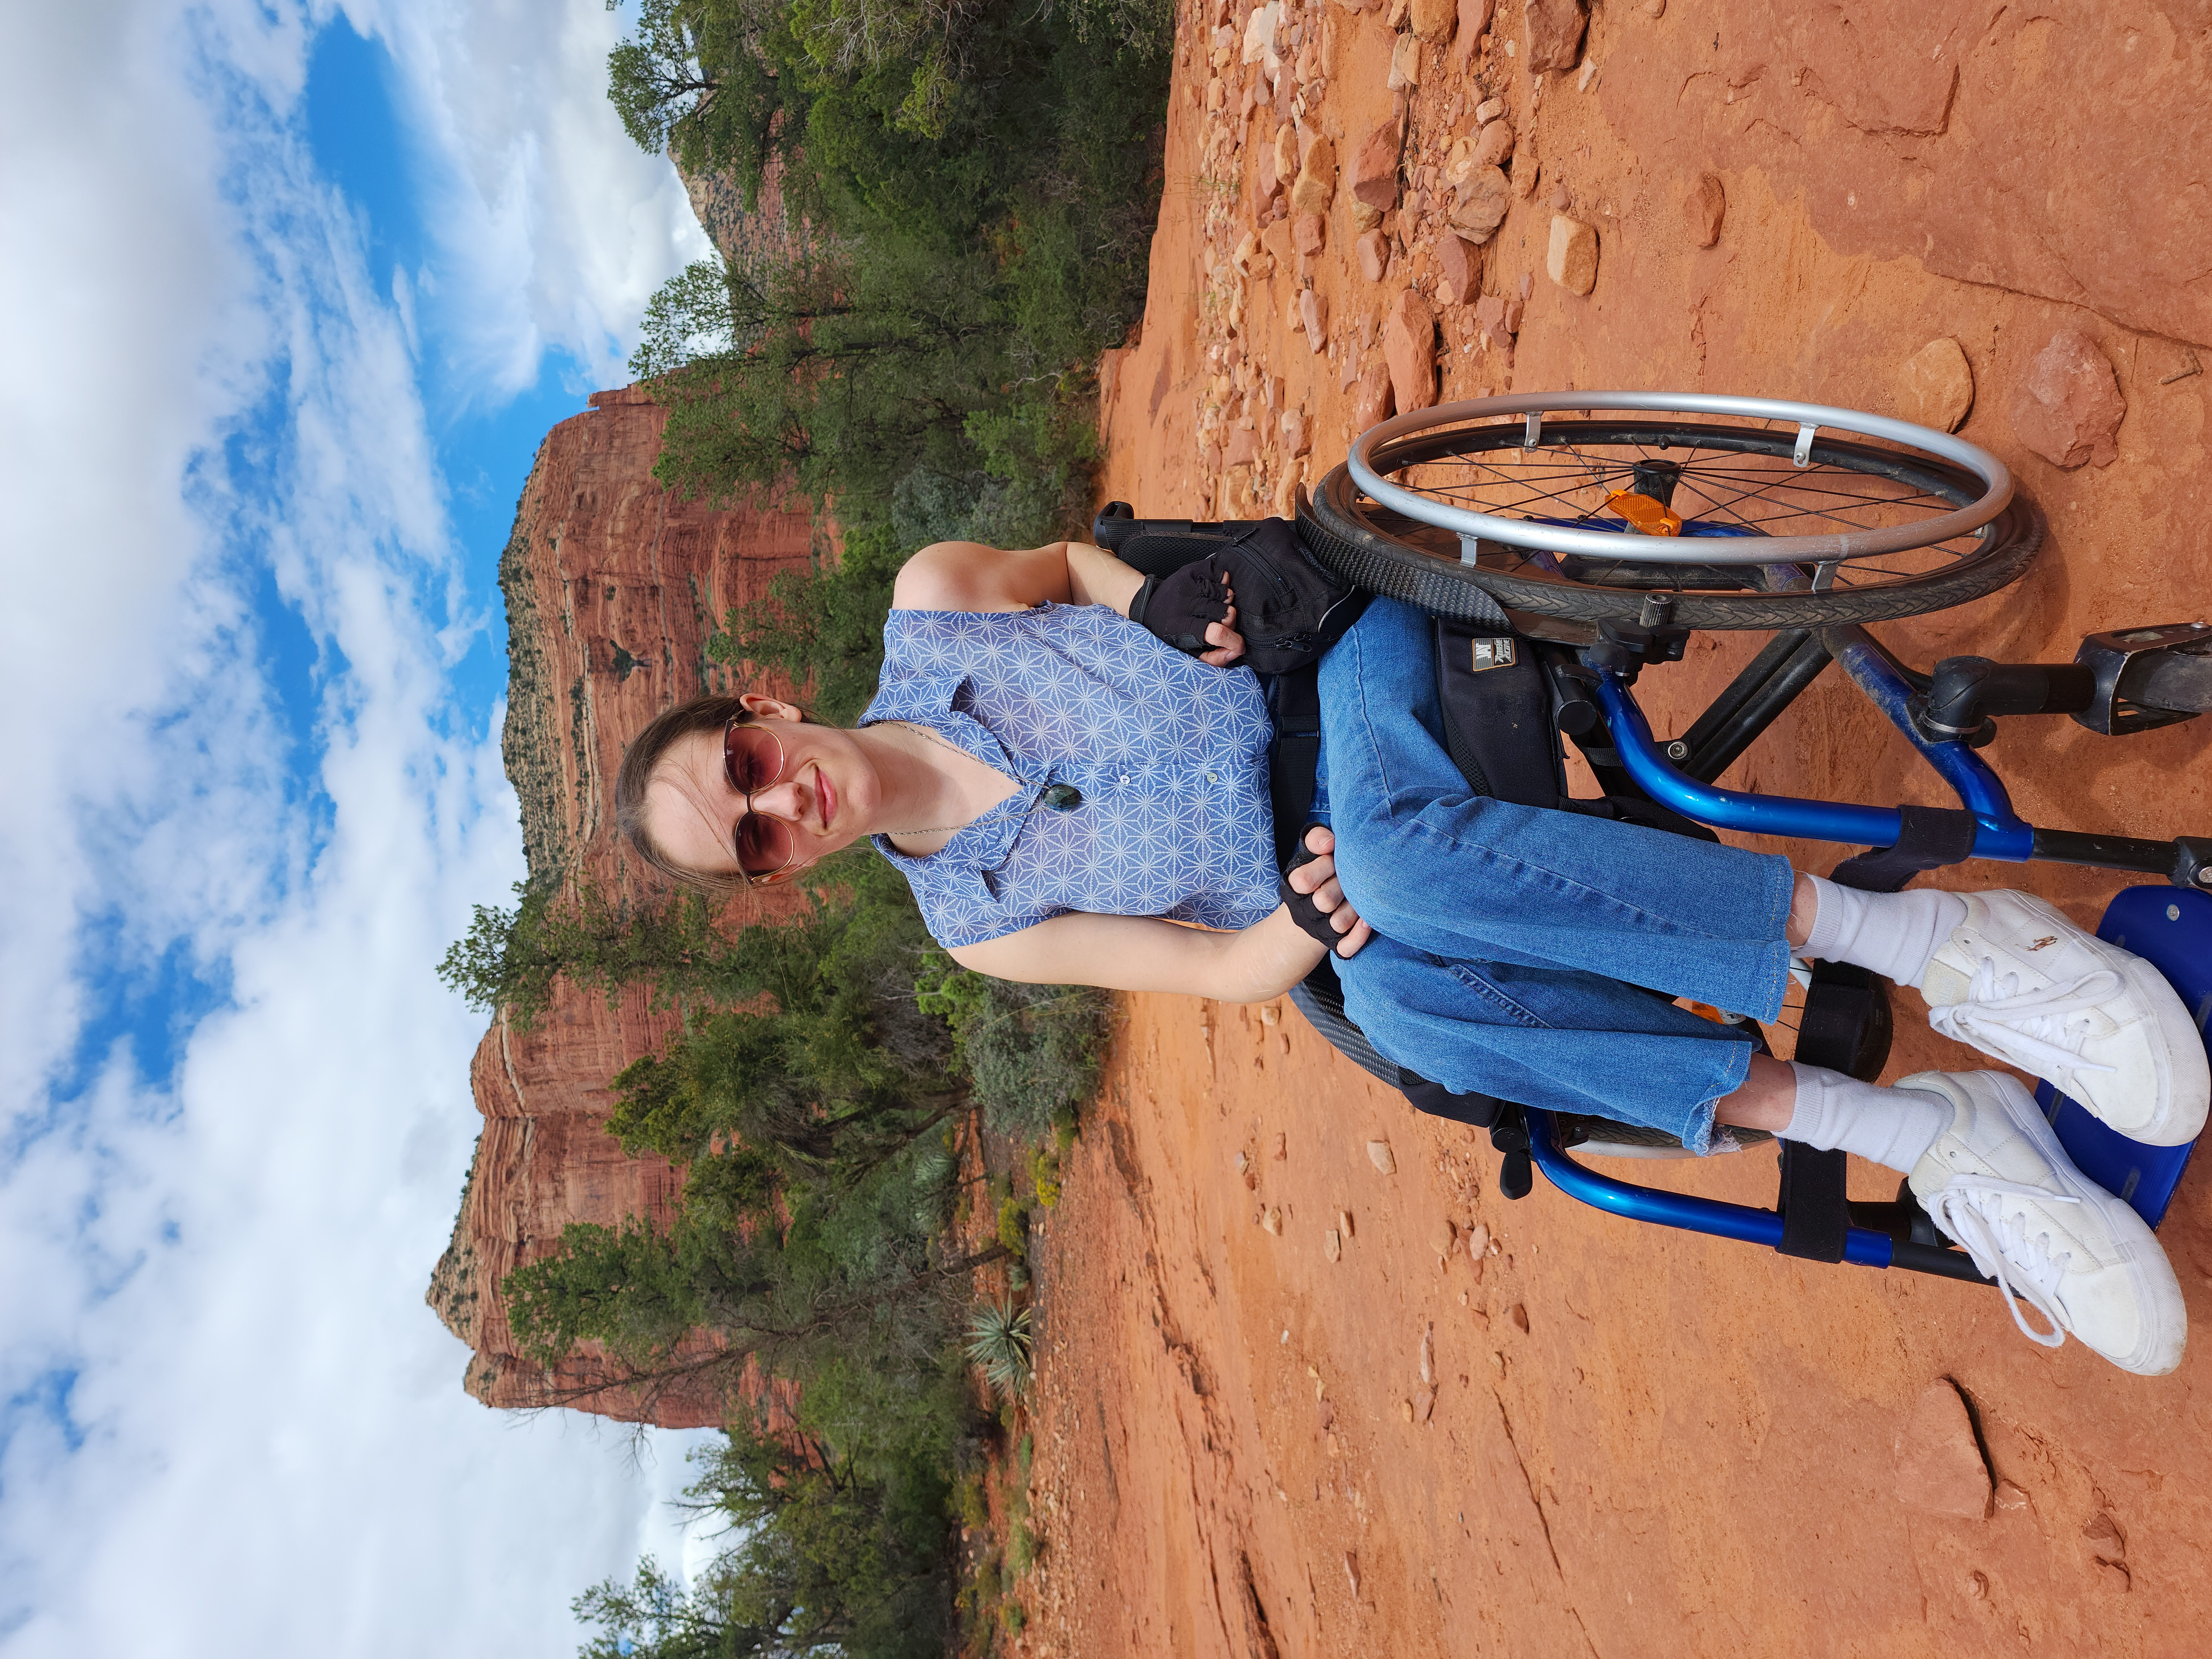 paraplegic woman visiting canyons in Arizona while in wheelchair